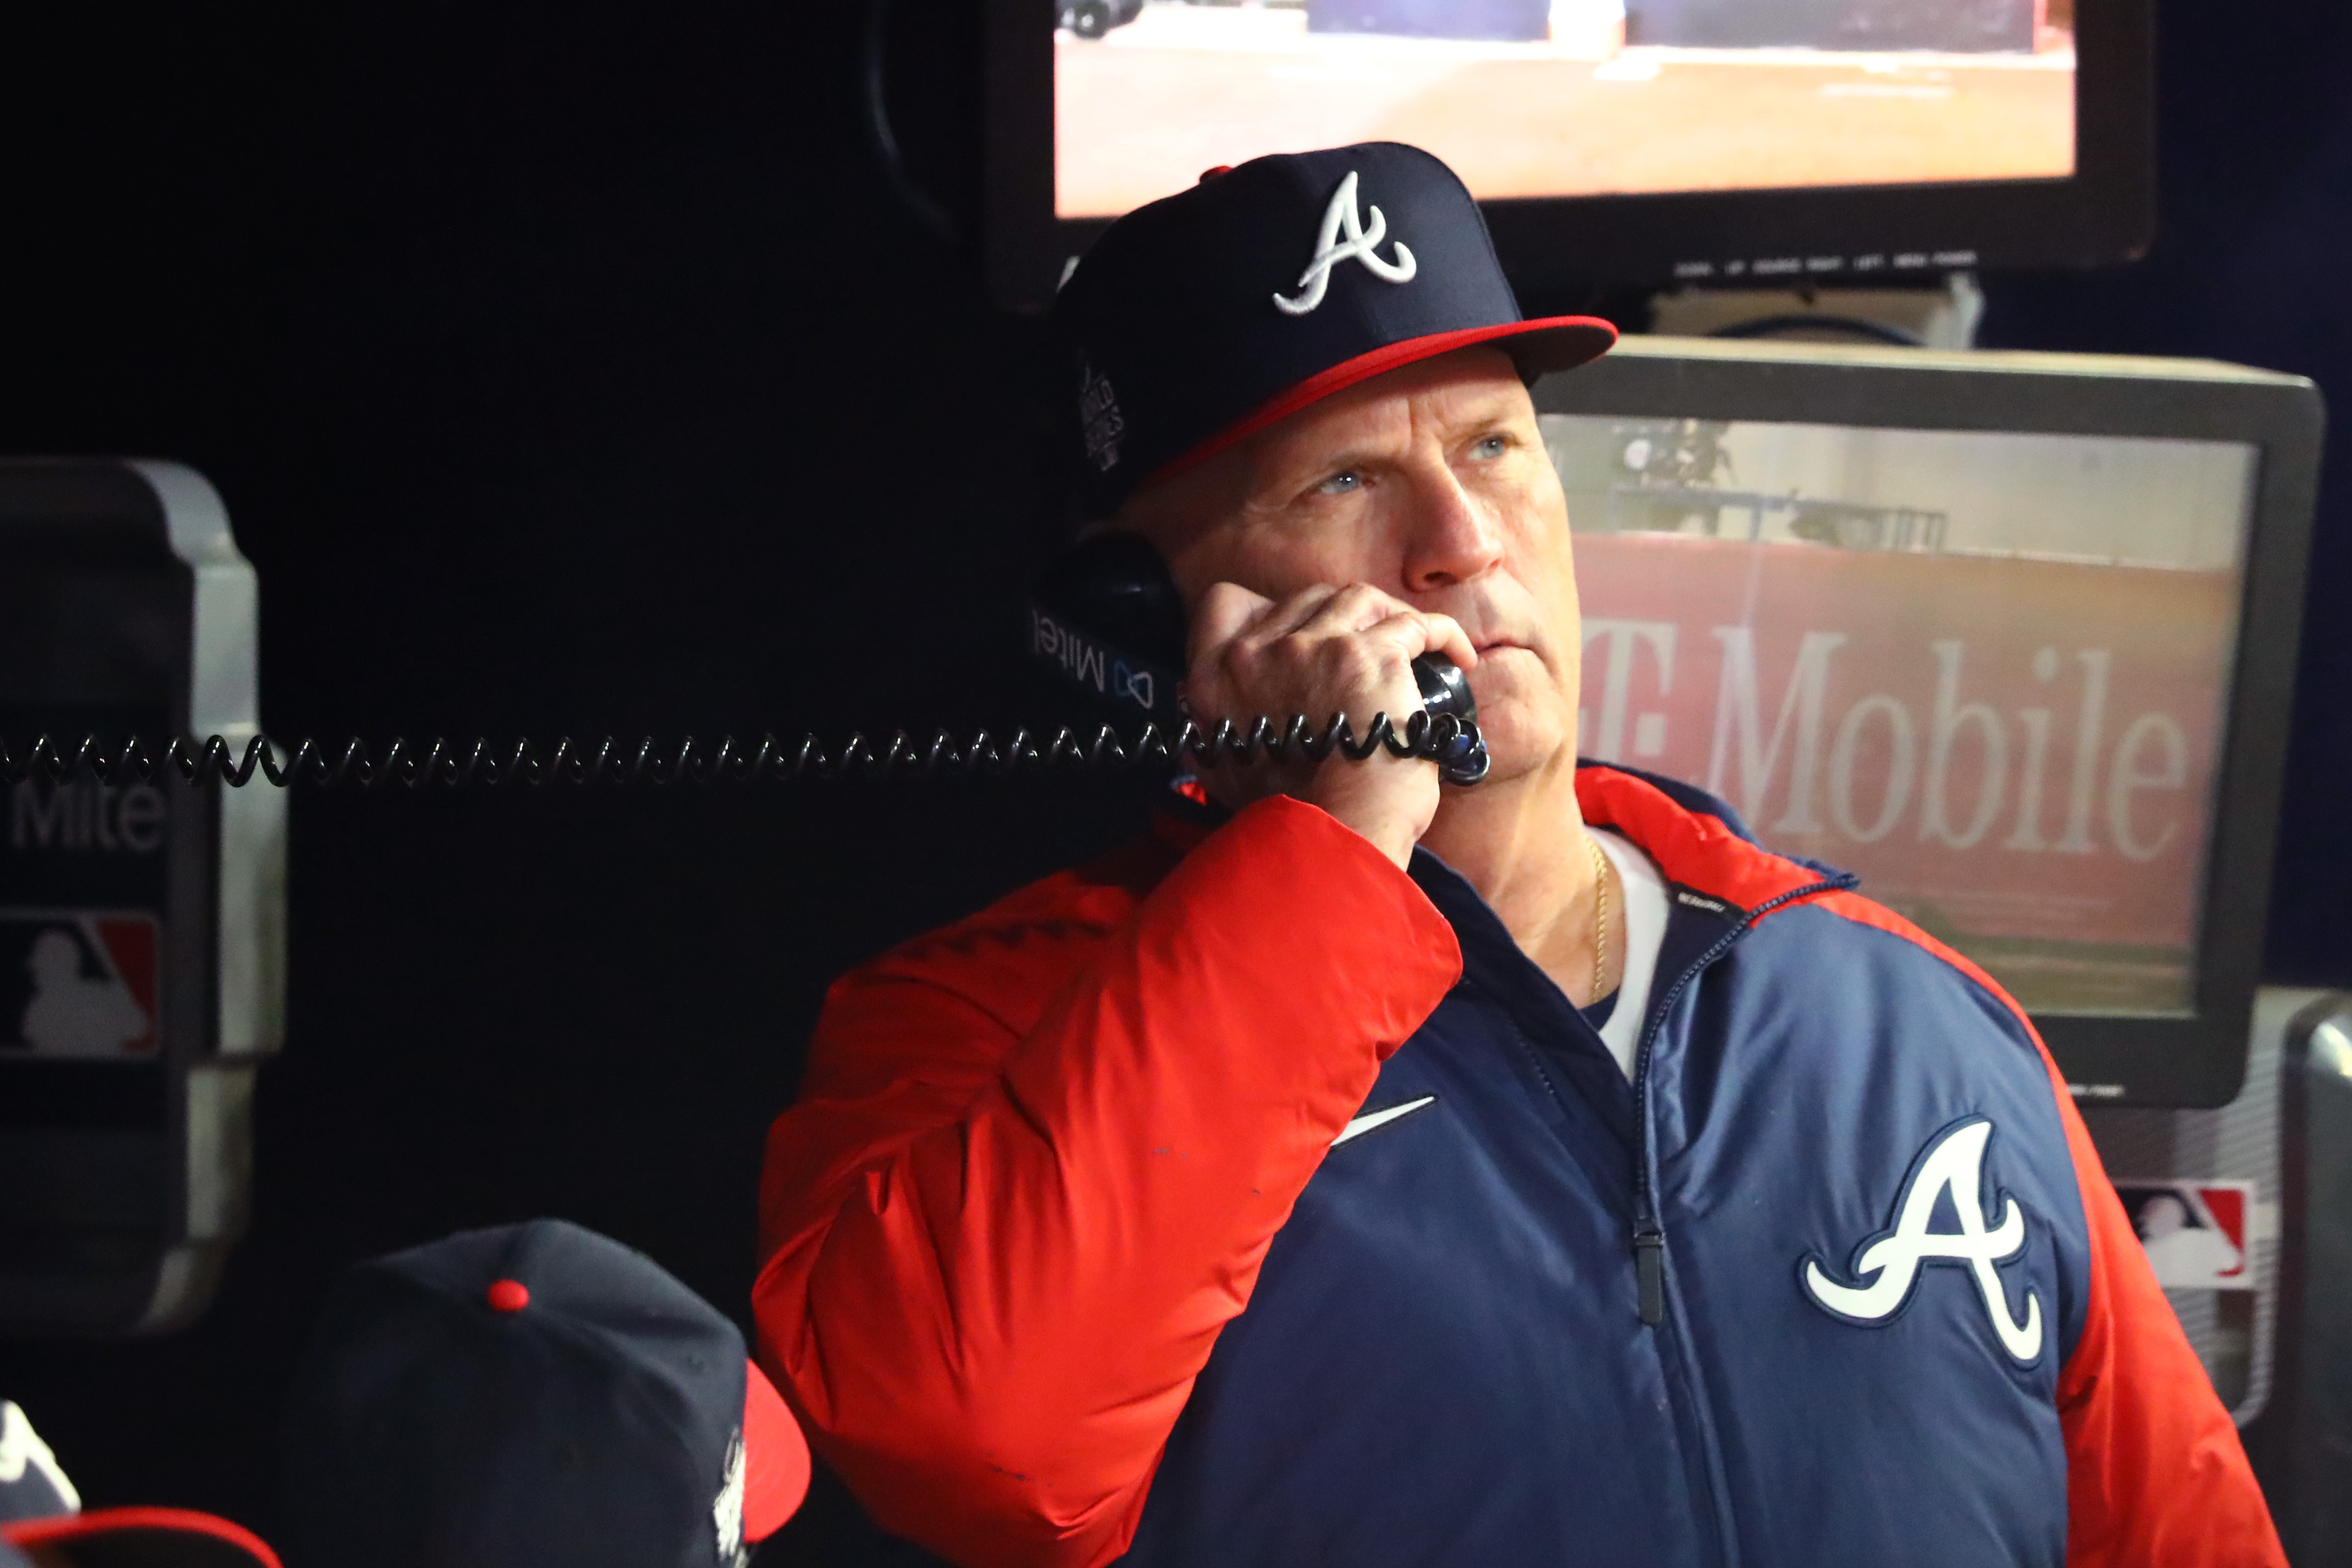 DOB blog: Even jaded writer can be excited about this Braves season